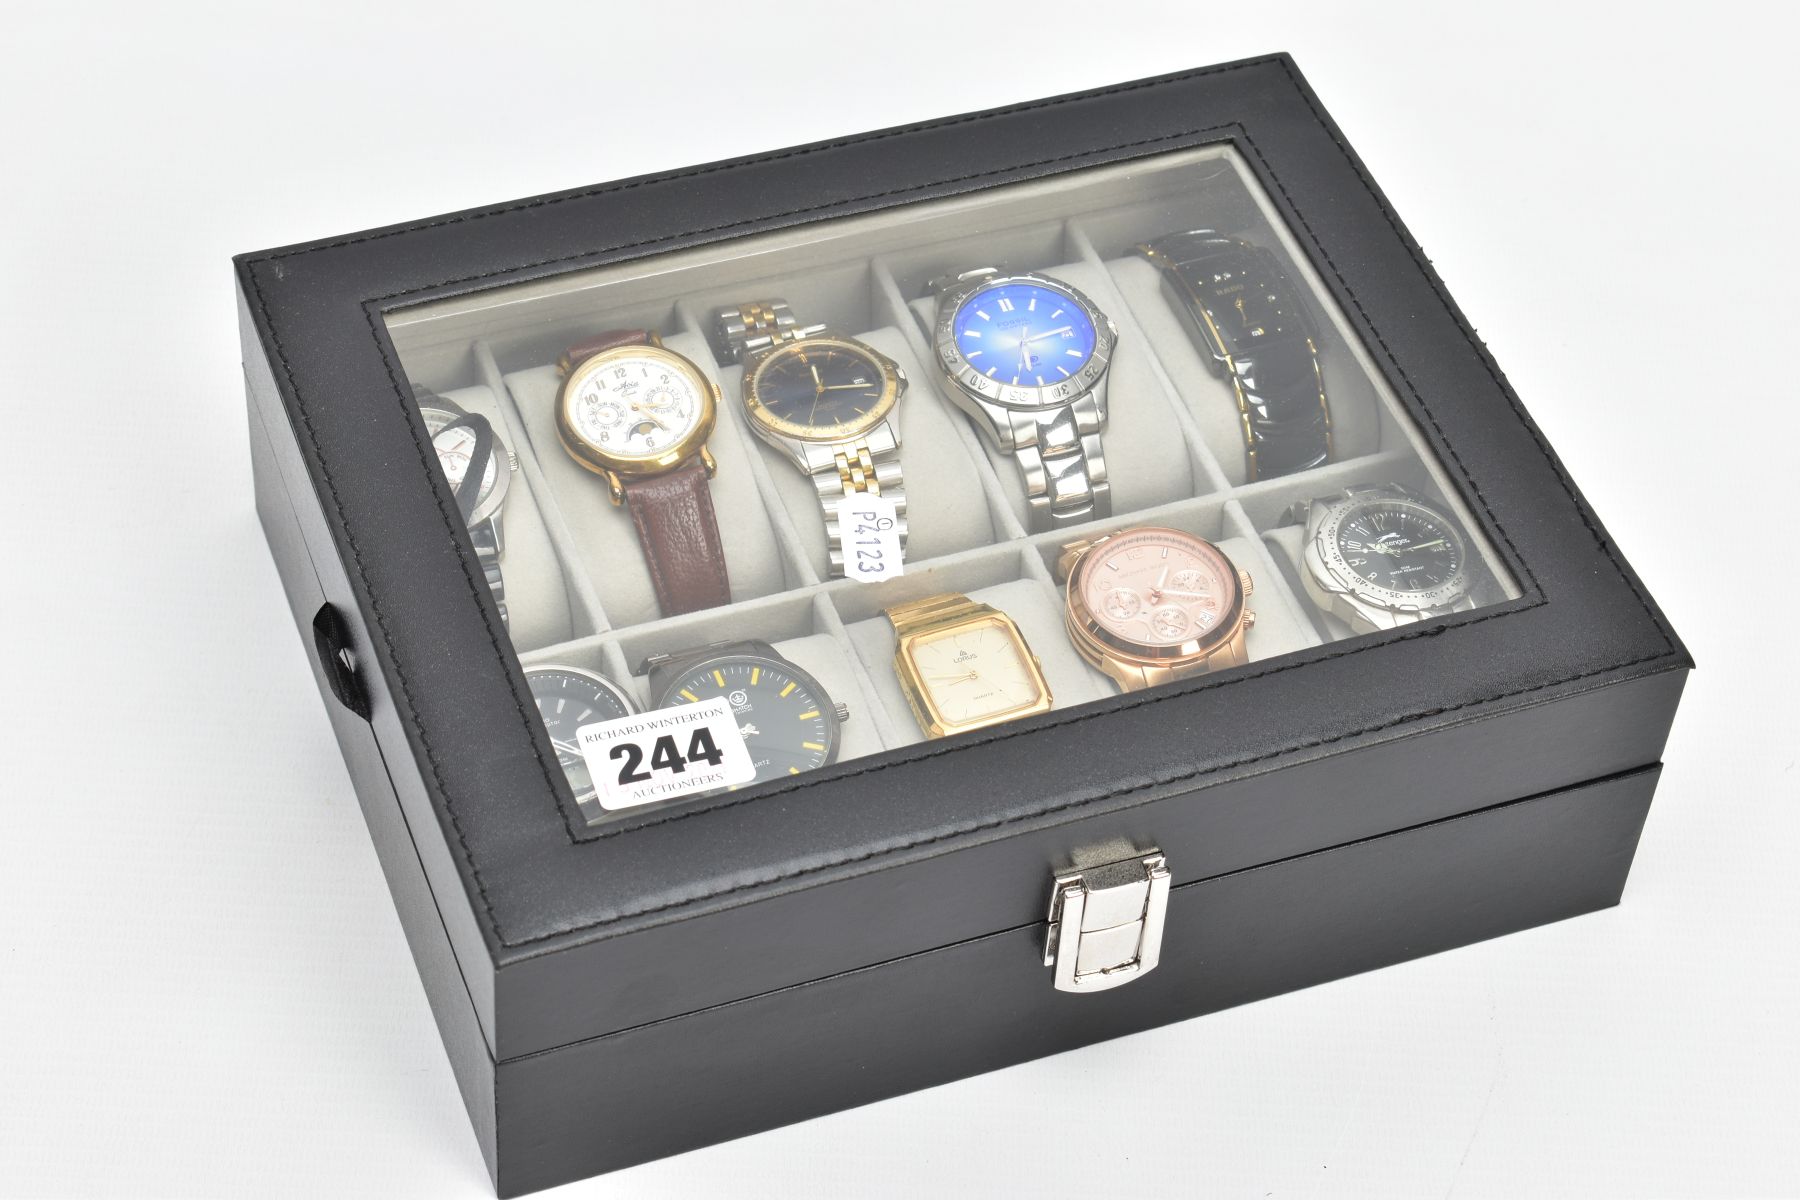 SELECTION OF WATCHES IN A DISPLAY BOX, display box encasing ten watches, names to include Casio, - Image 4 of 4